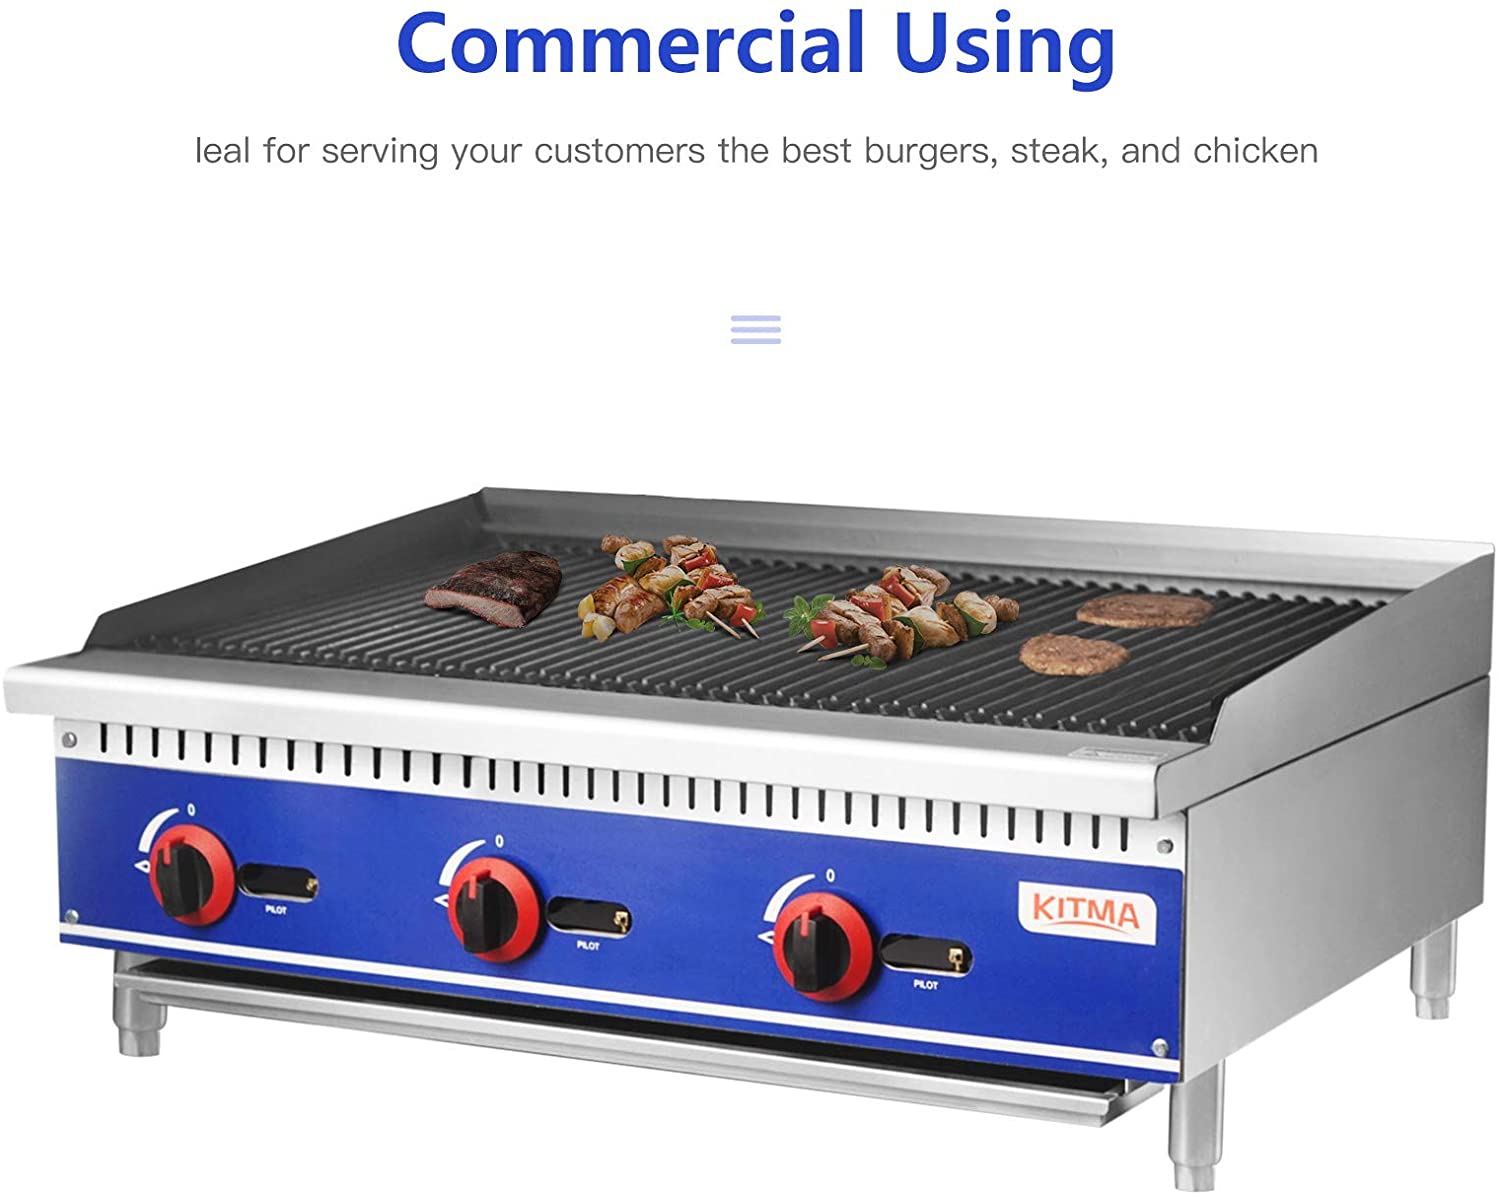 KITMA Commercial Countertop Radiant CharBroiler - 36 Inches Natural Gas Char Broiler with Grill for Barbecue, 105,000 BTU per Hour - image 3 of 7